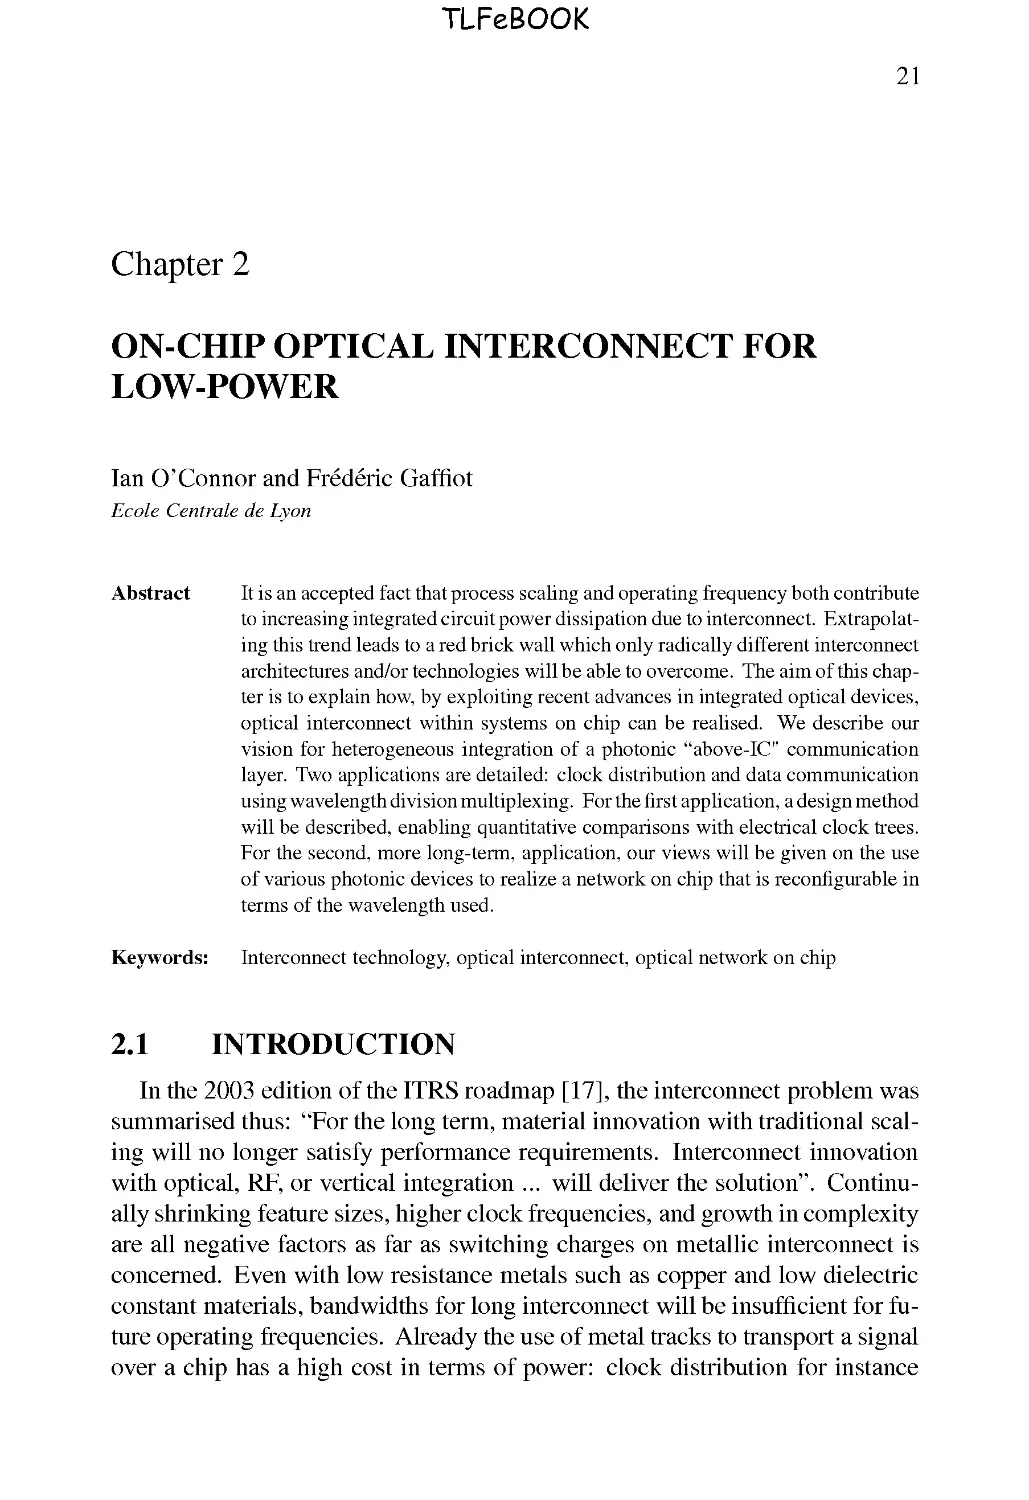 2. ON-CHIP OPTICAL INTERCONNECT FOR LOW-POWER